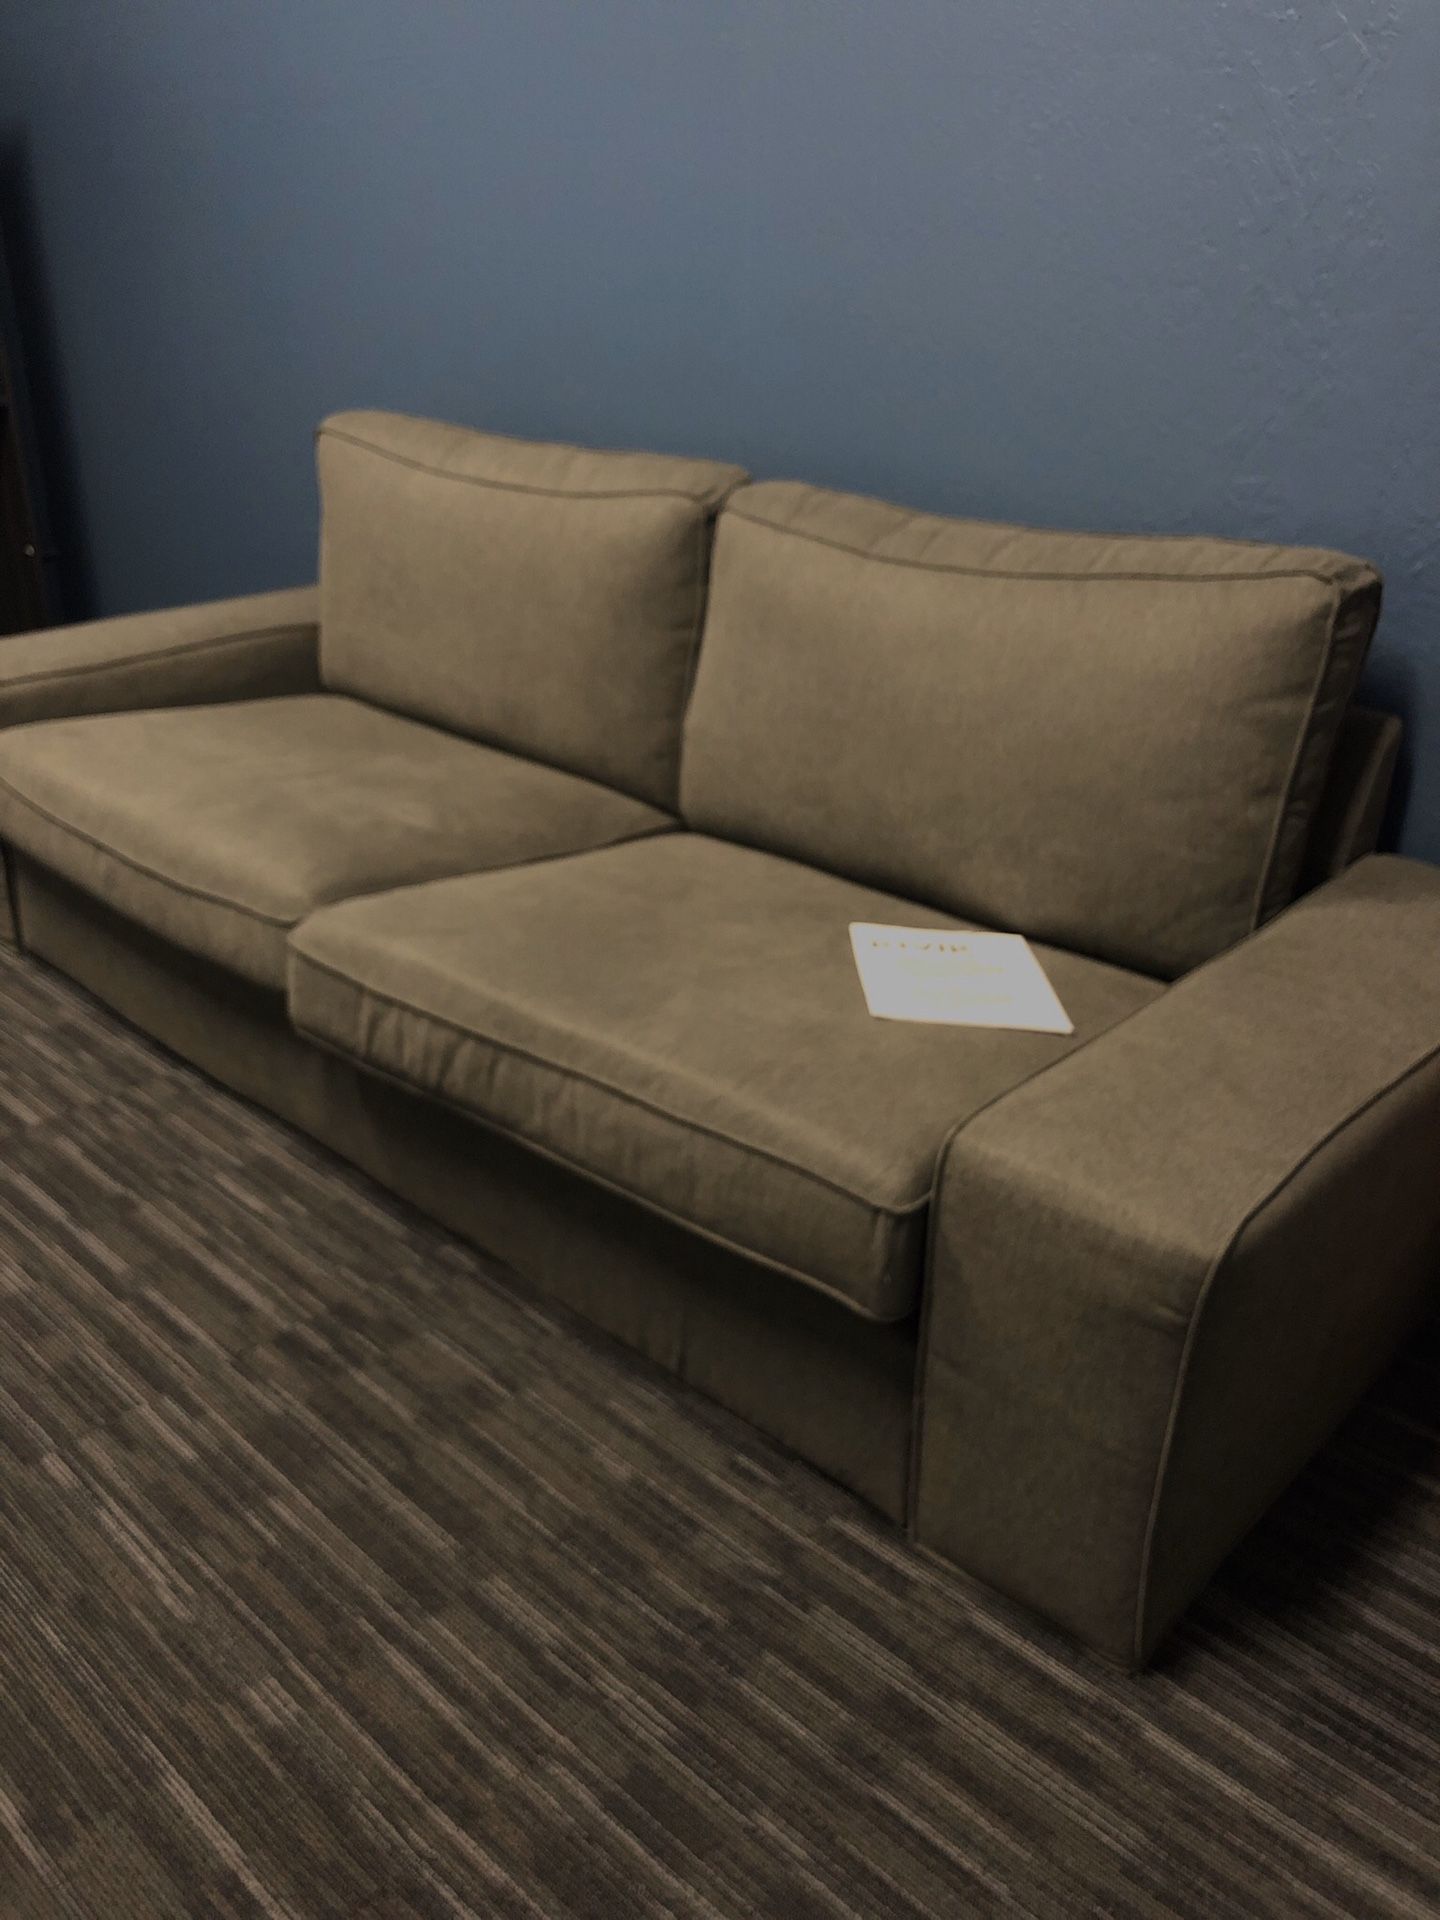 IKEA Kivik couch in gray-green